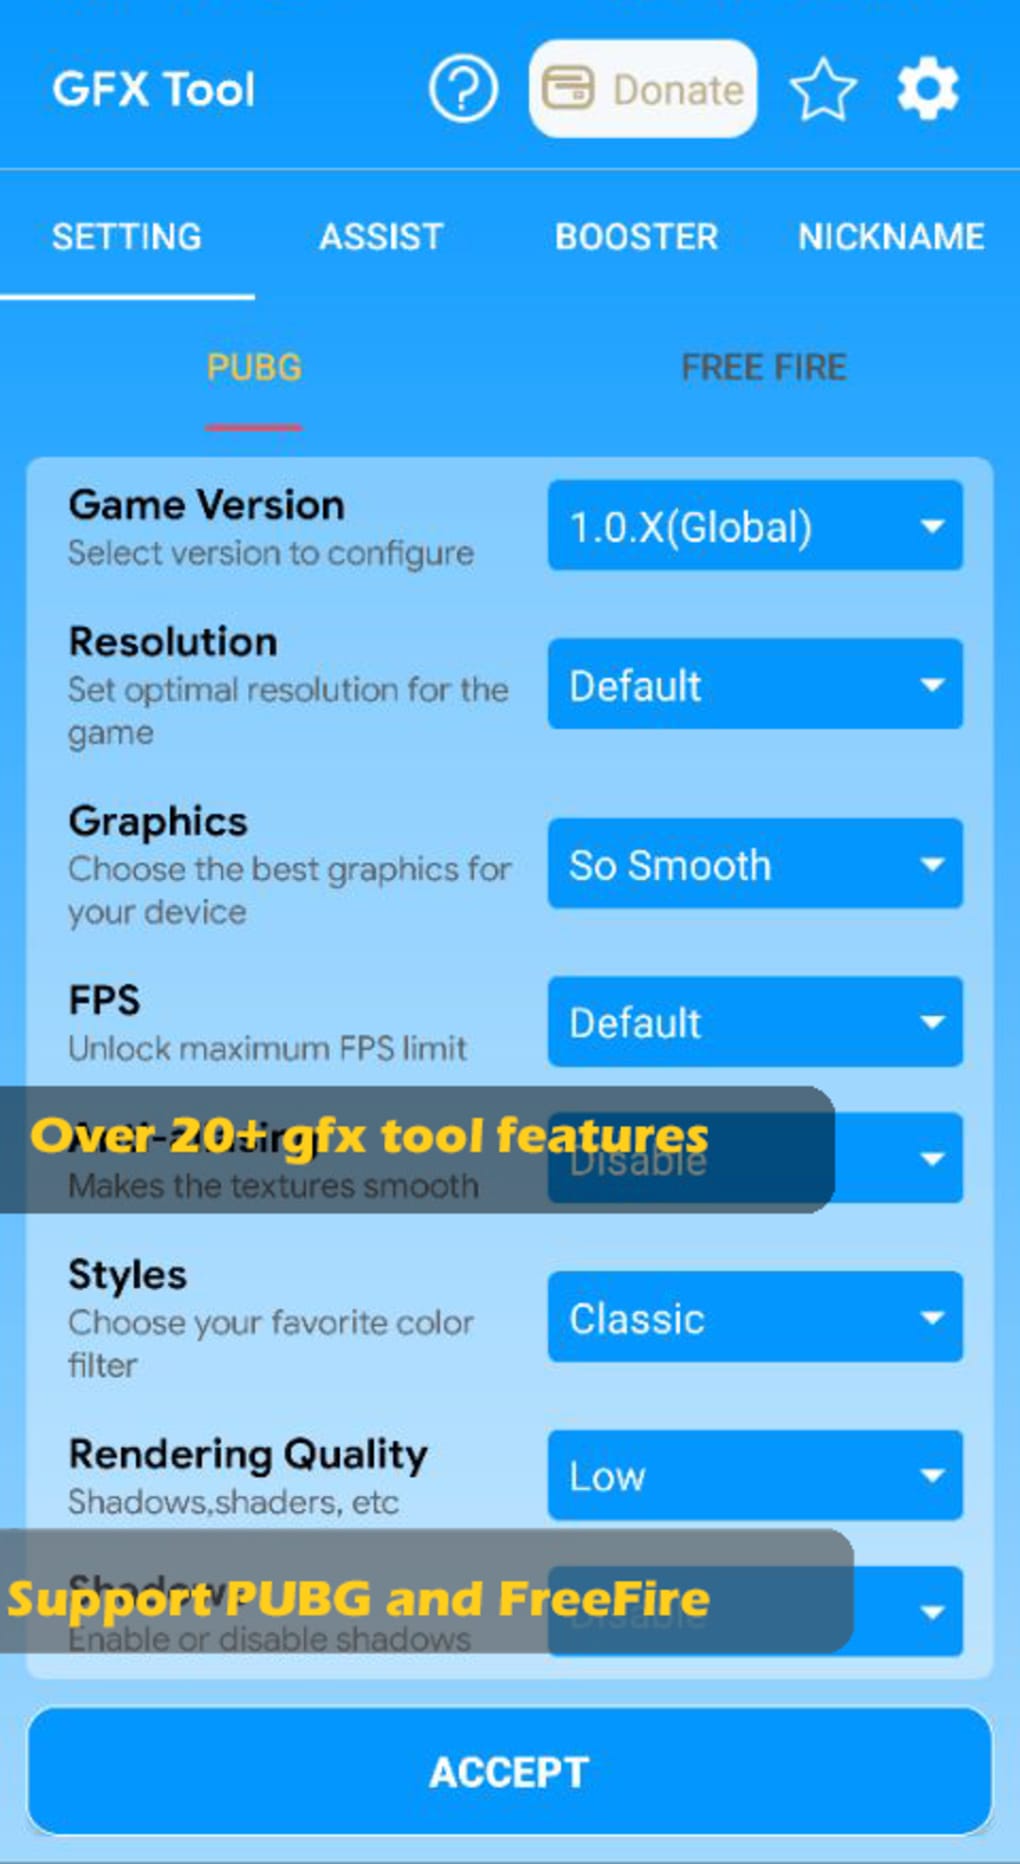 FT Tools - GFX Tool for FREE FIRE for Android - Download